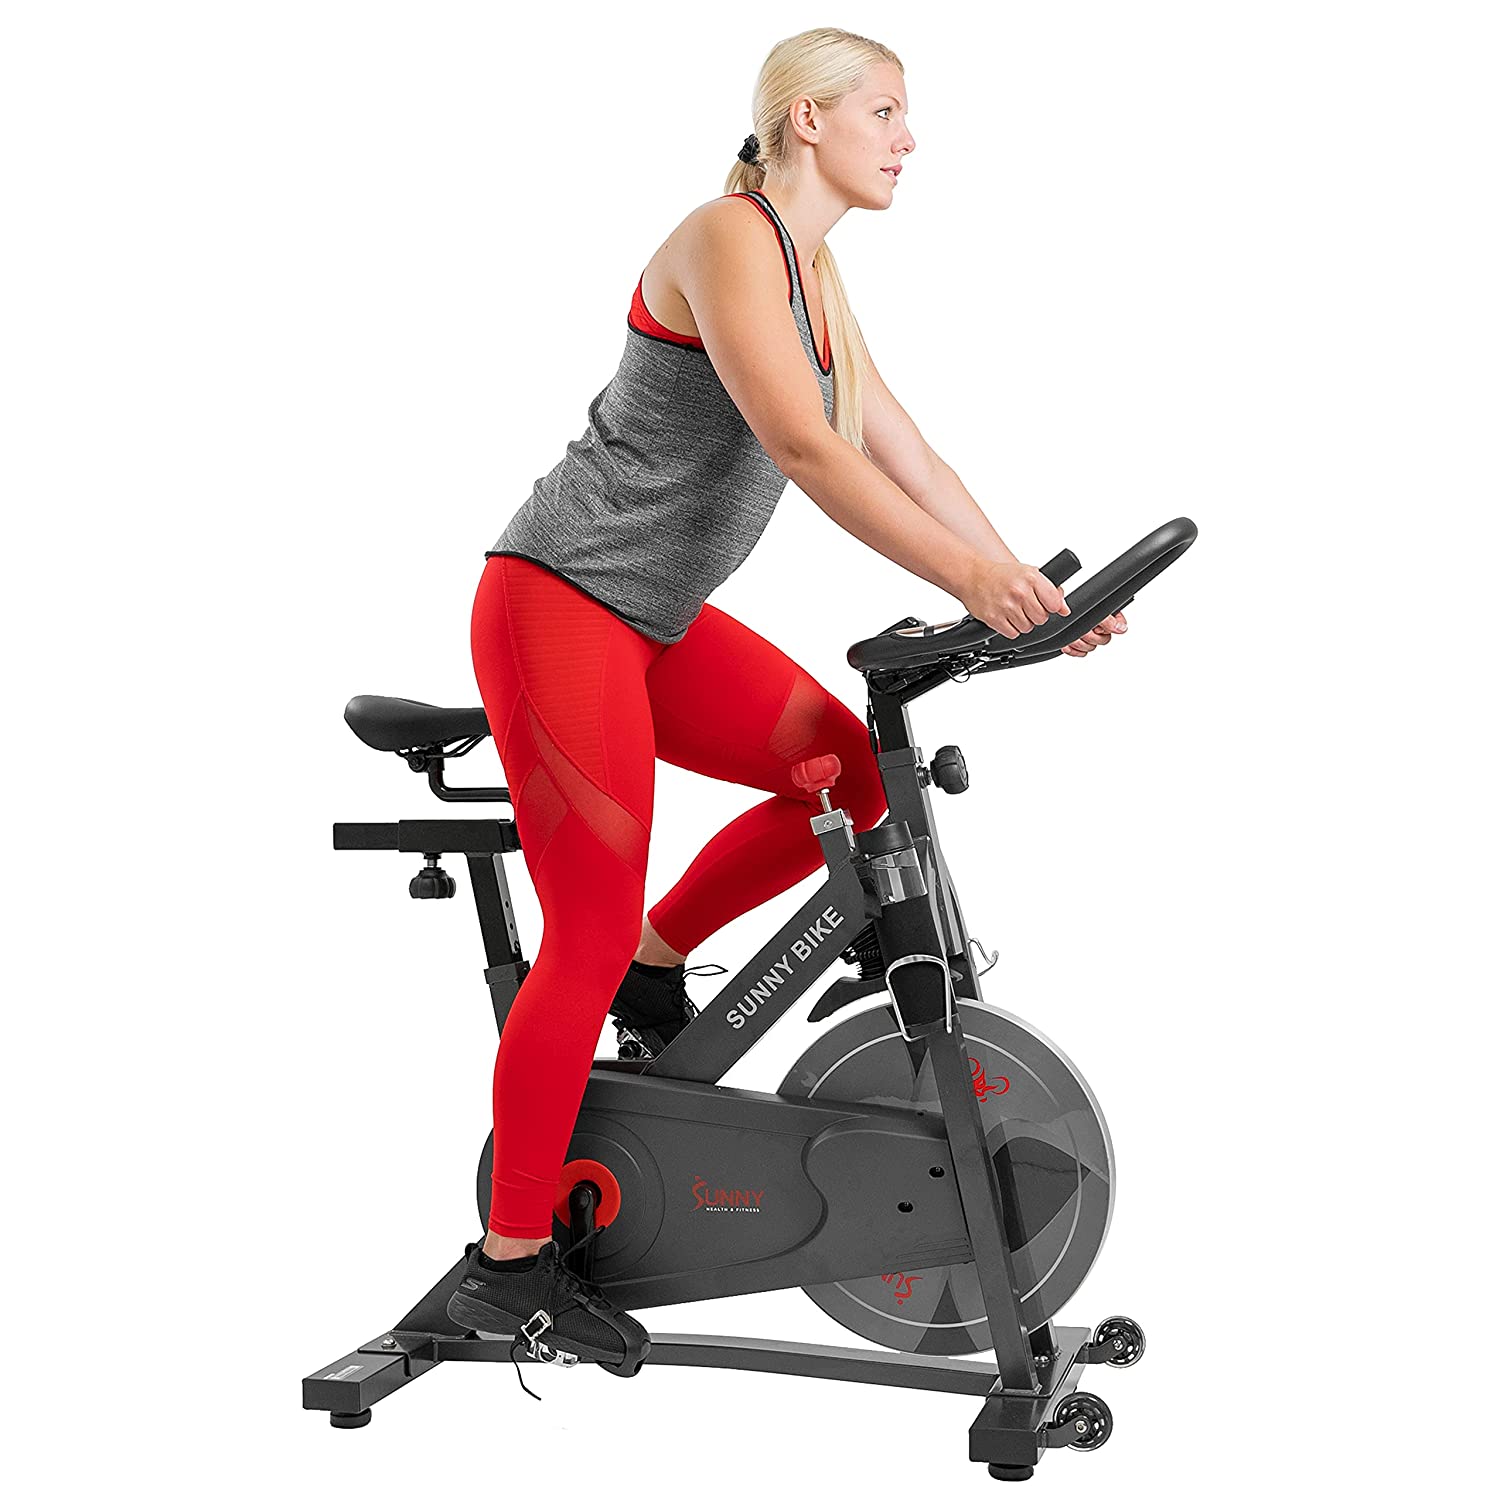 Best treadmill bike for fitness enthusiasts